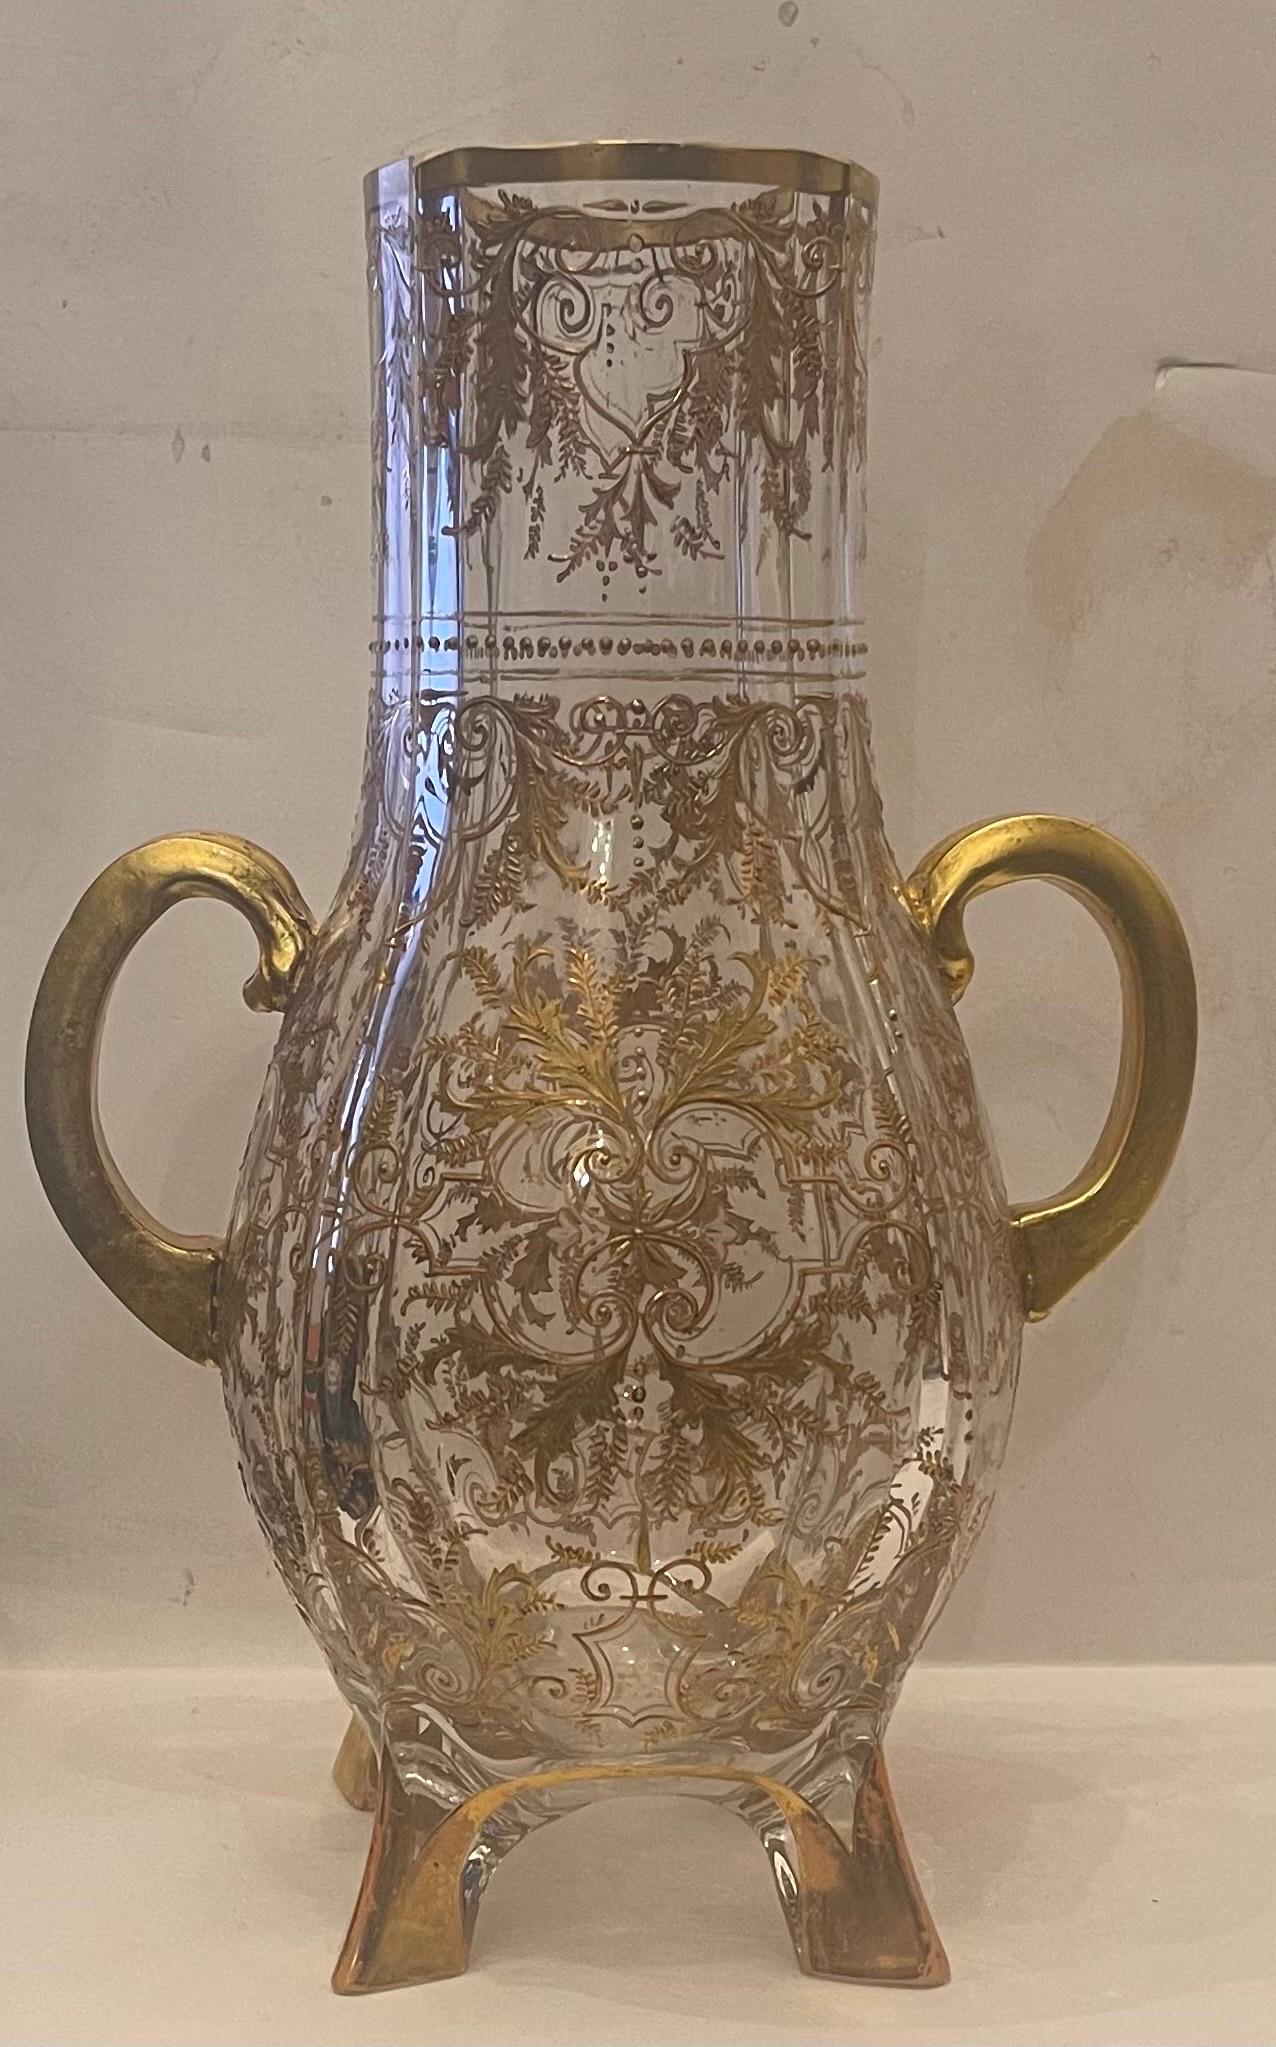 A Wonderful Large Moser Clear Art Glass Urn Form Vase With Raised Gold Gilt And Enamel Hand Painting.